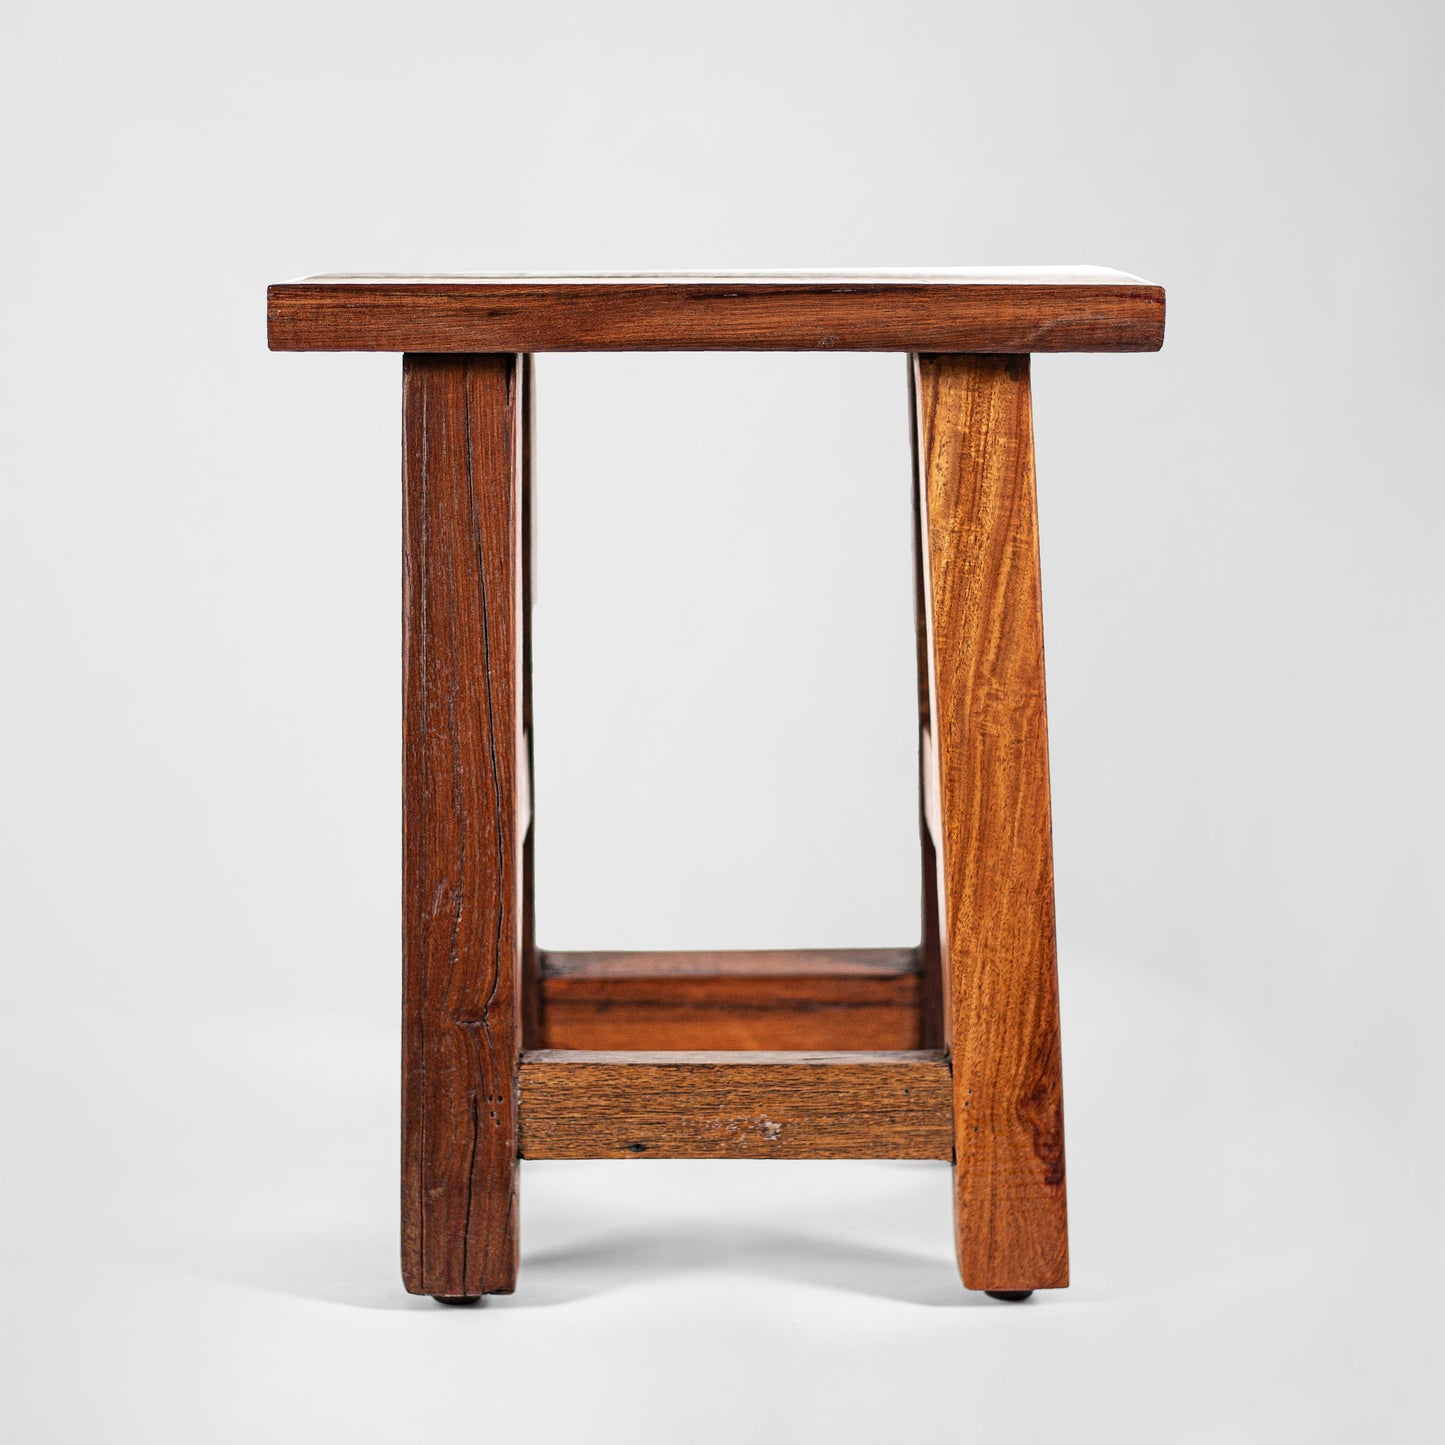 Woody Wayne – country house design stool made of wood